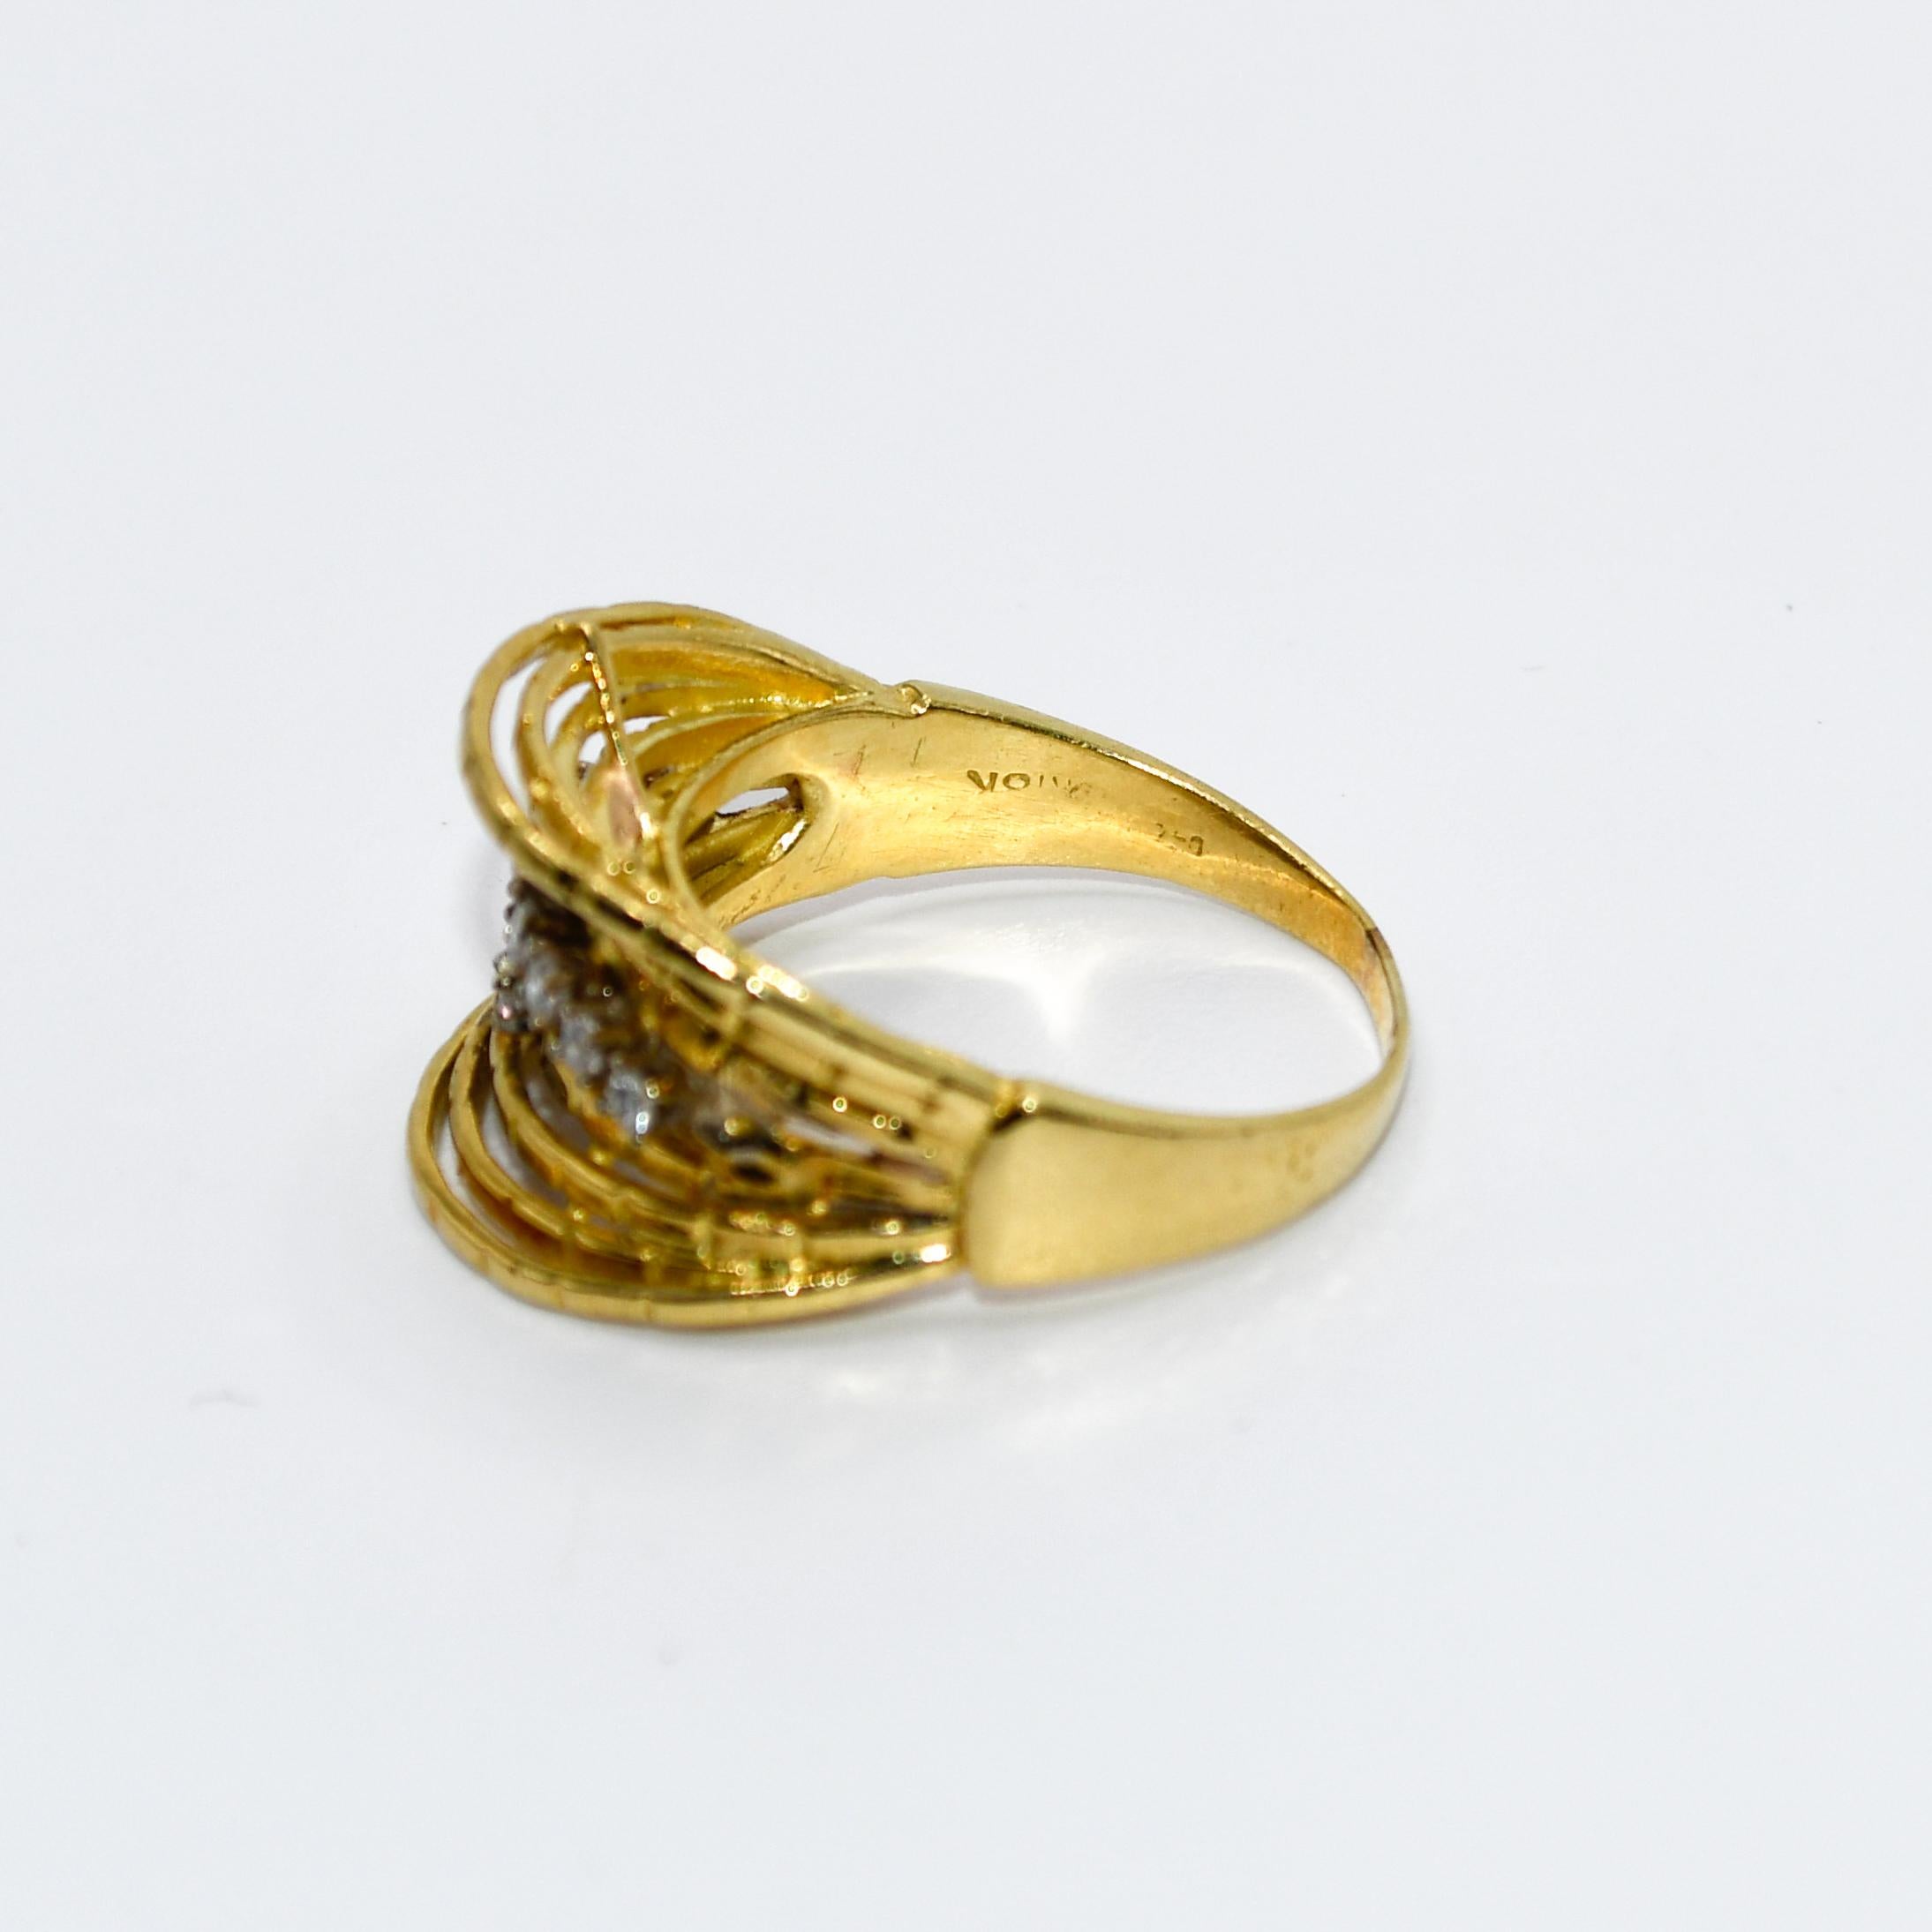 18k Yellow Gold Diamond Ring, 7.6gr For Sale 2